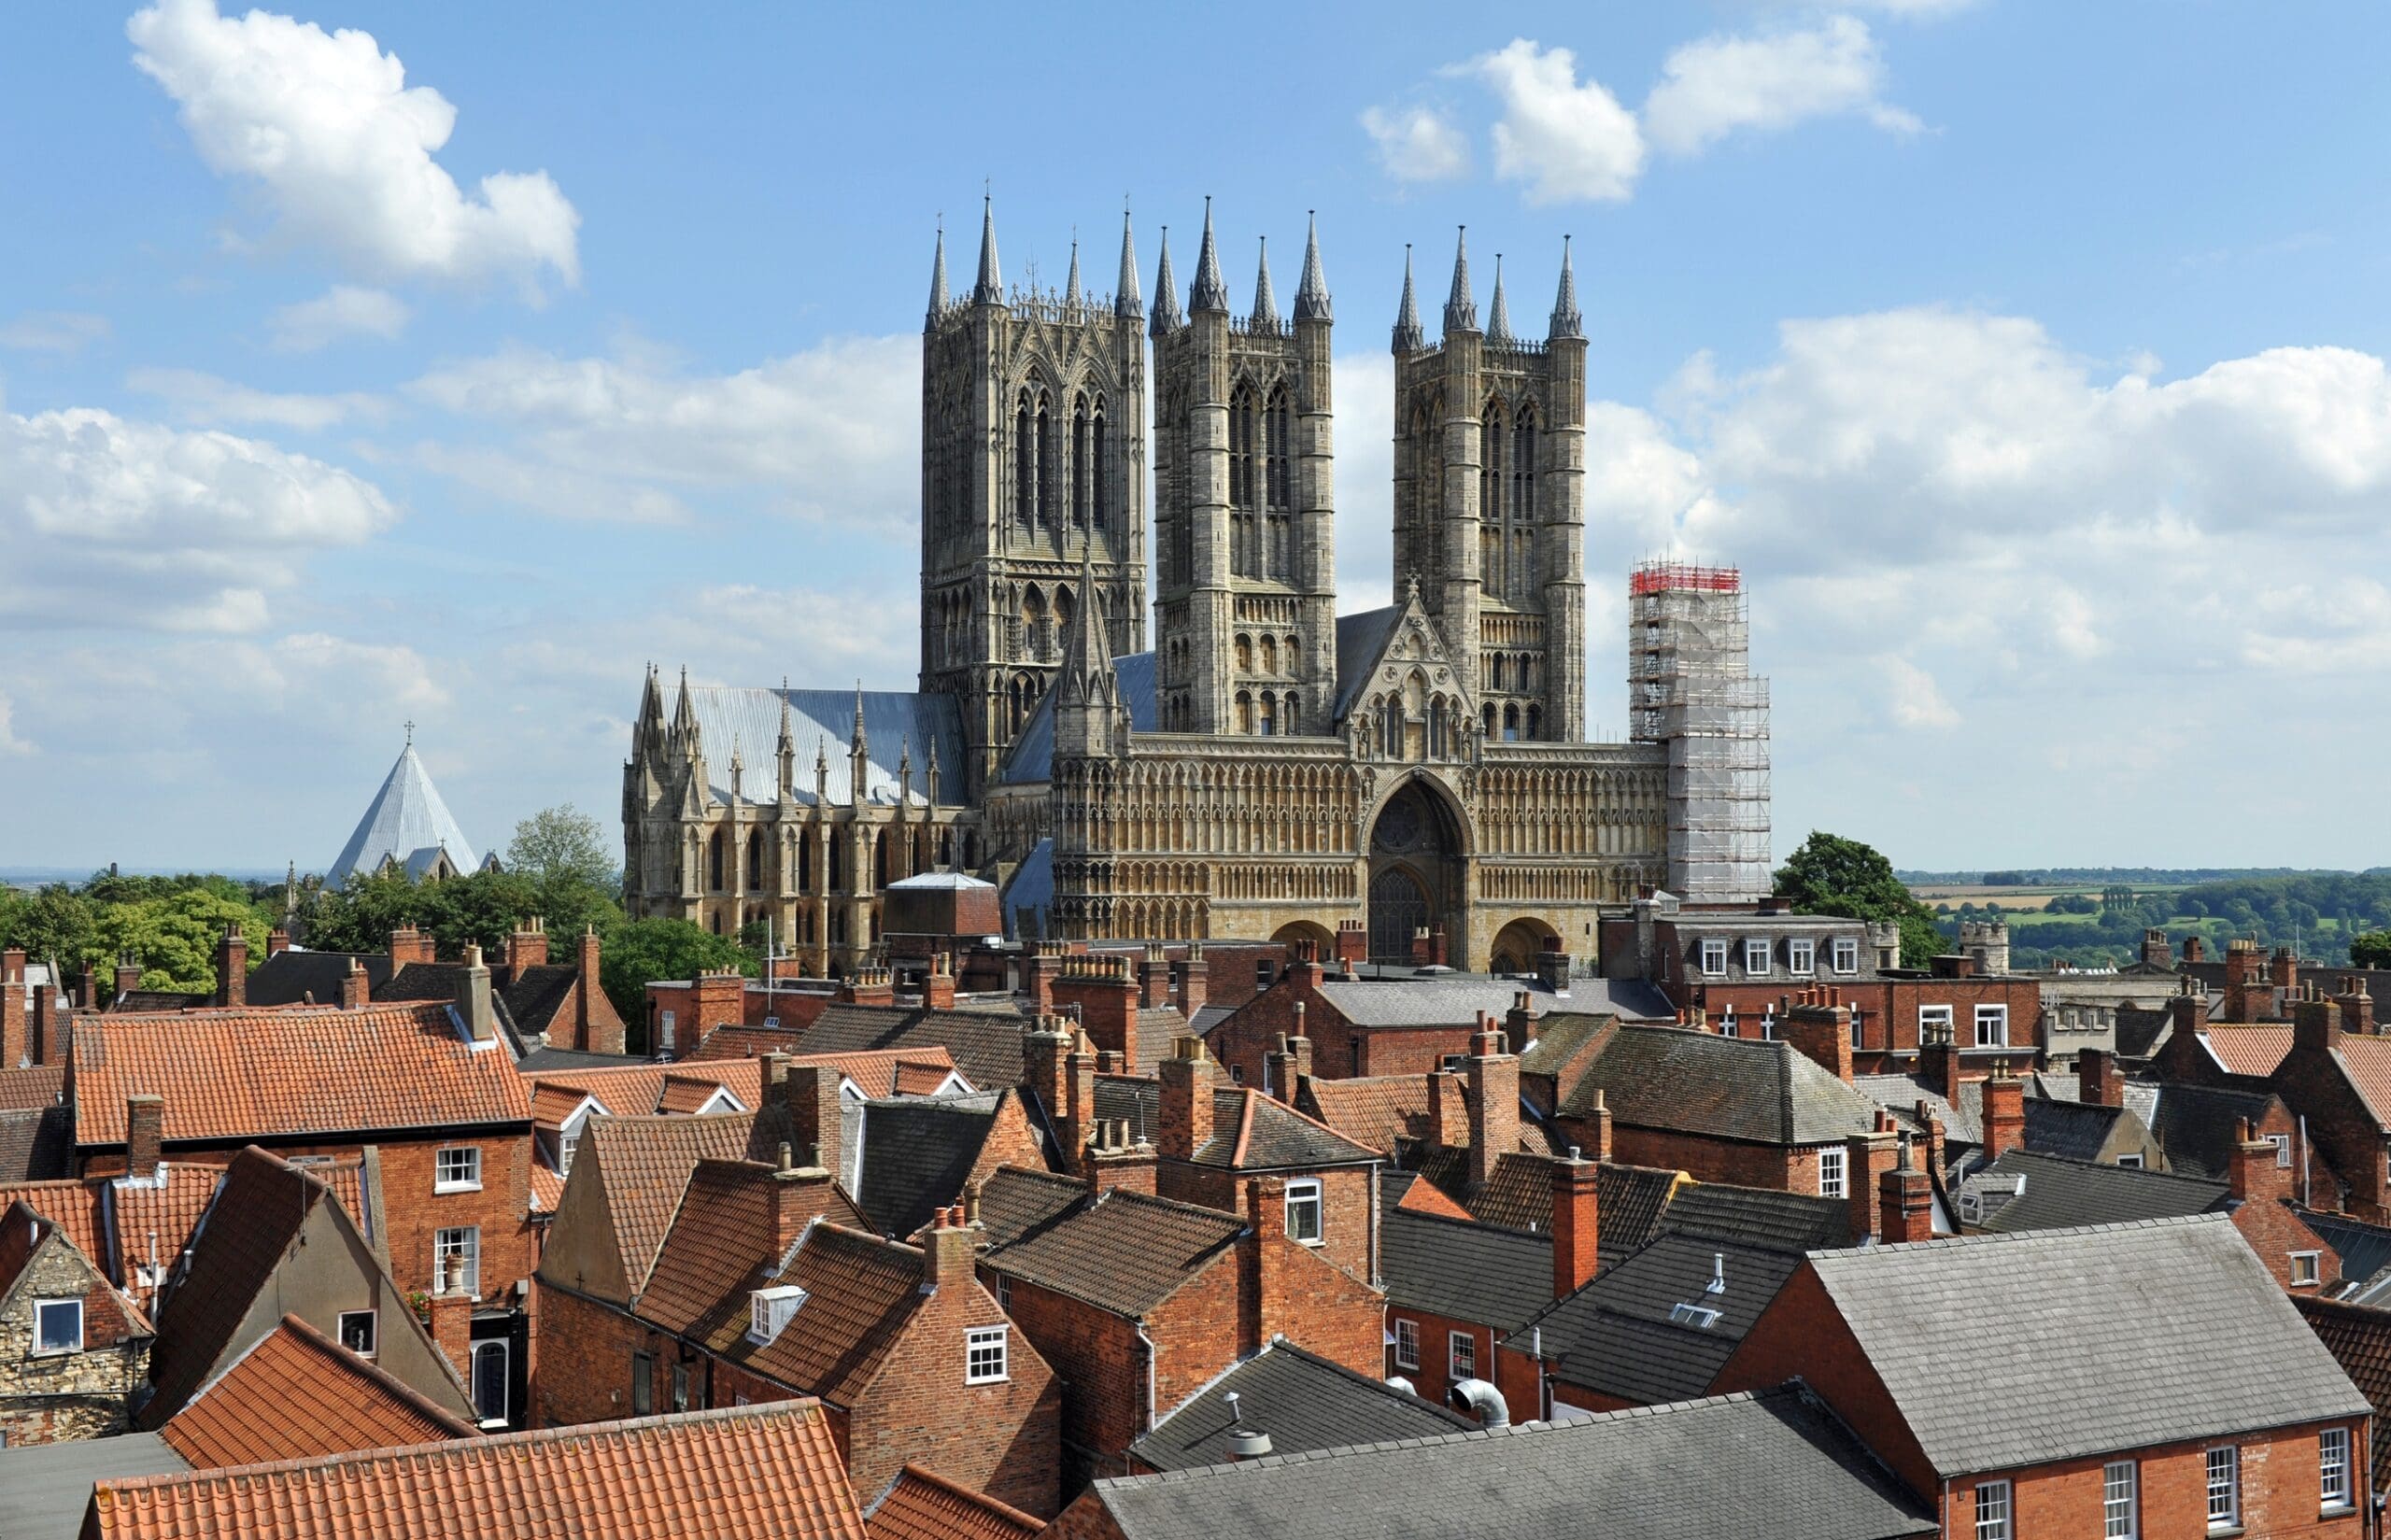 What are the best Photography Spots in Lincoln?